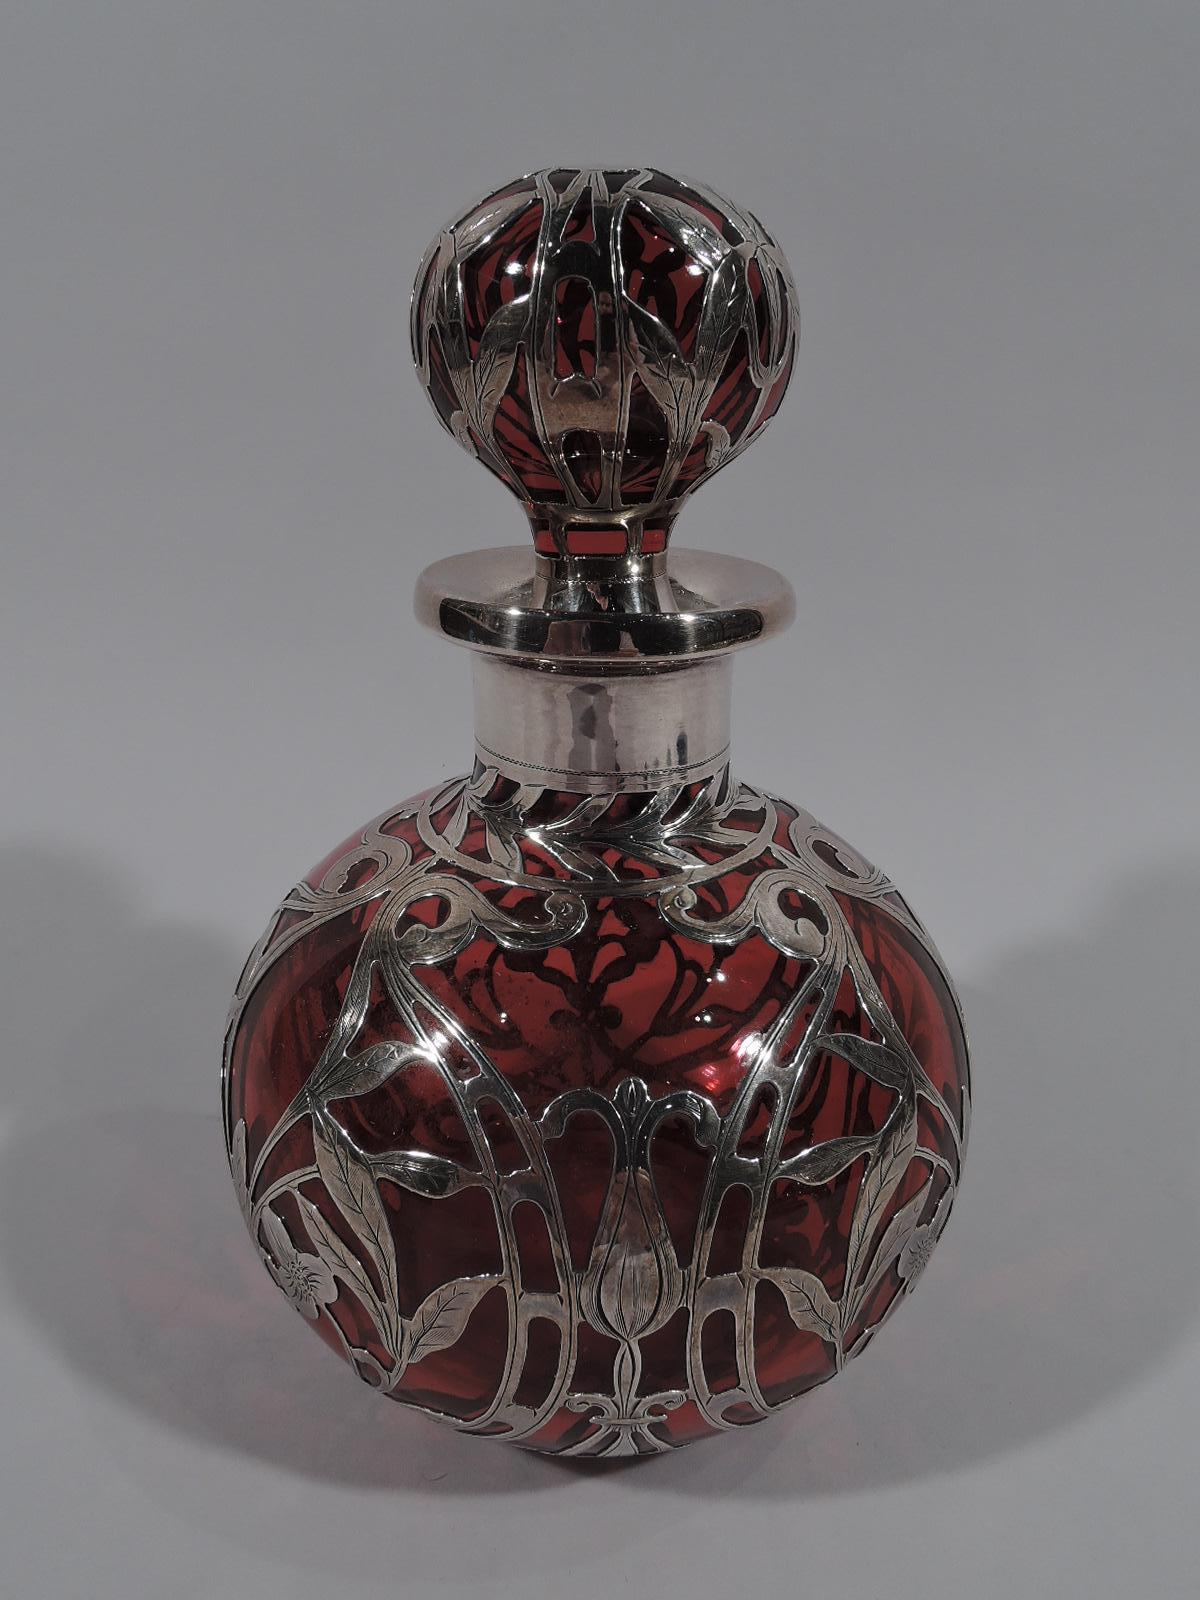 Large Art Nouveau red glass perfume with silver overlay. Made by Gorham in Providence, circa 1910. Globular with short neck and everted rim in silver collar. Ball stopper. Symmetrical overlay in fluid whiplash tendrils and stylized leaves. Elongated